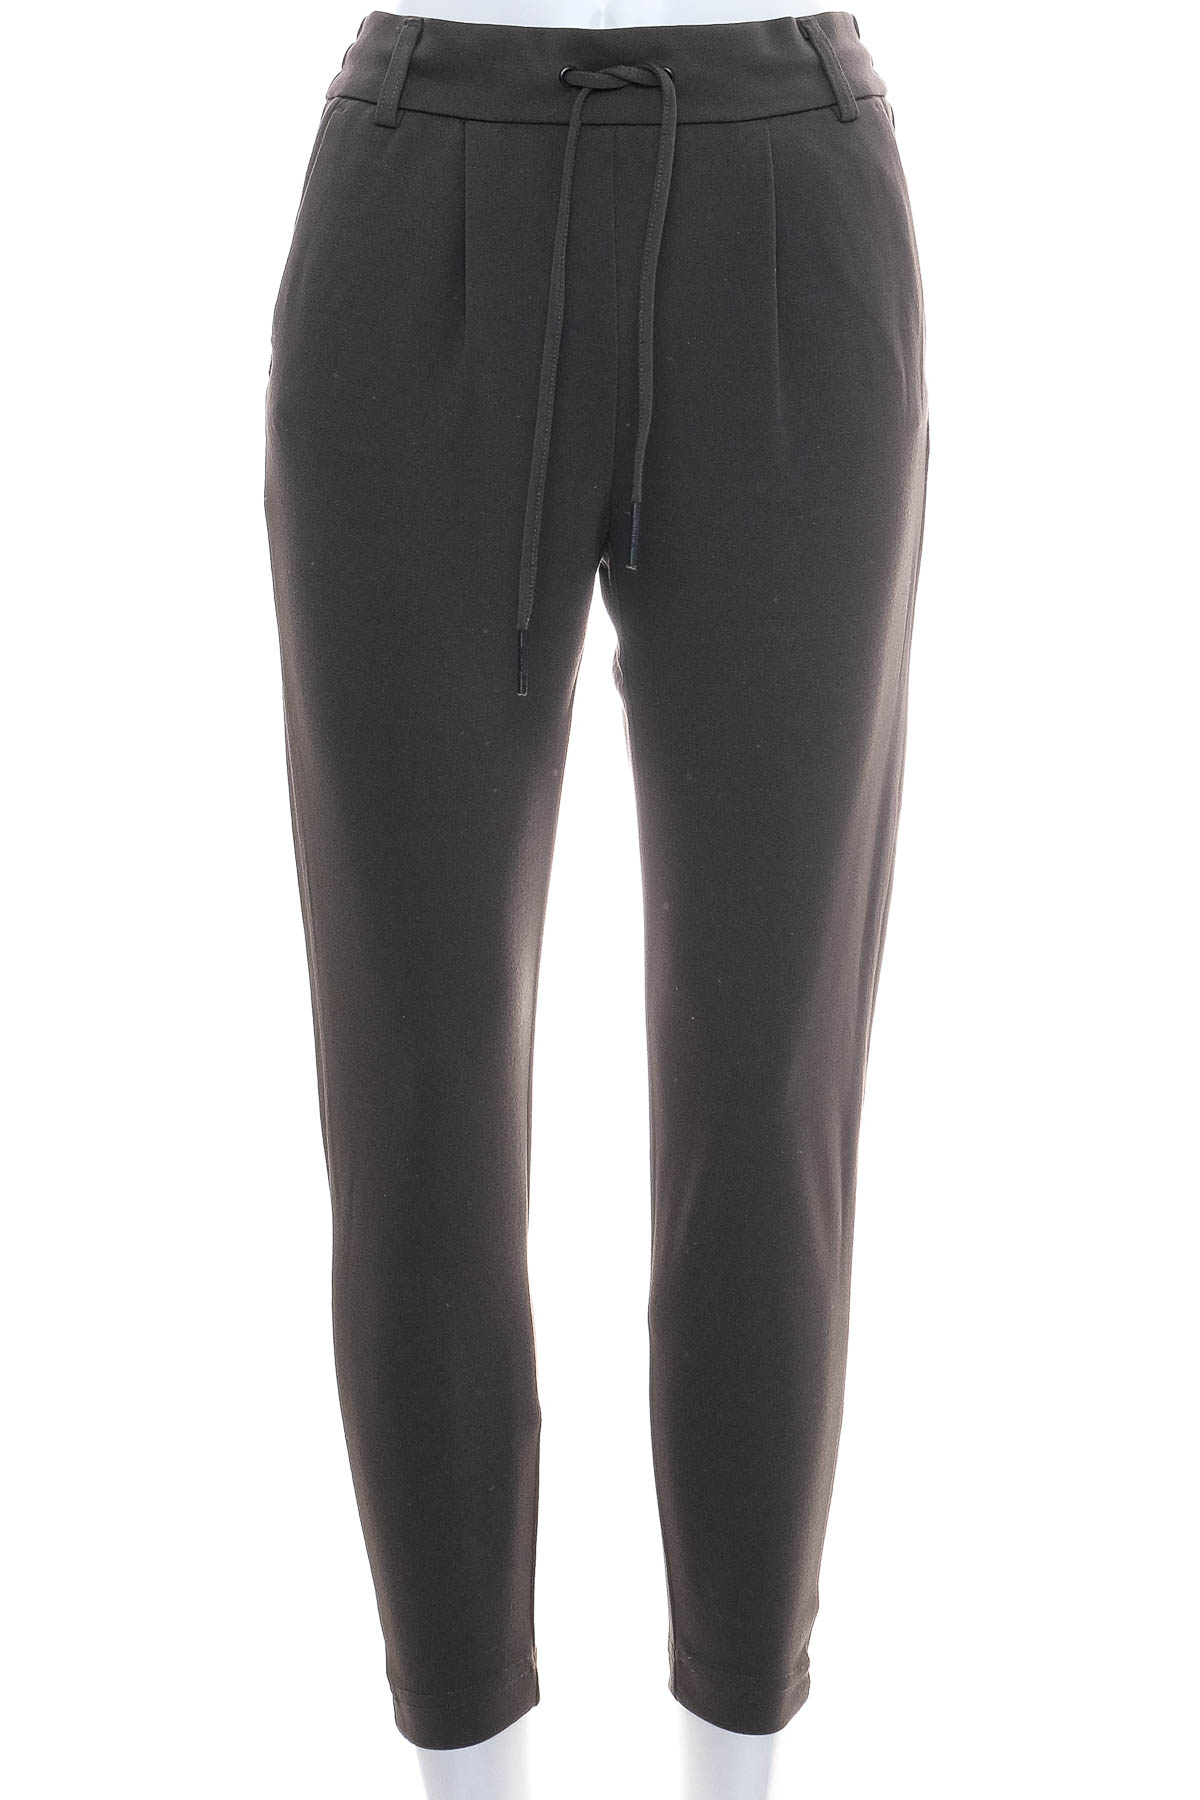 Women's trousers - ONLY - 0